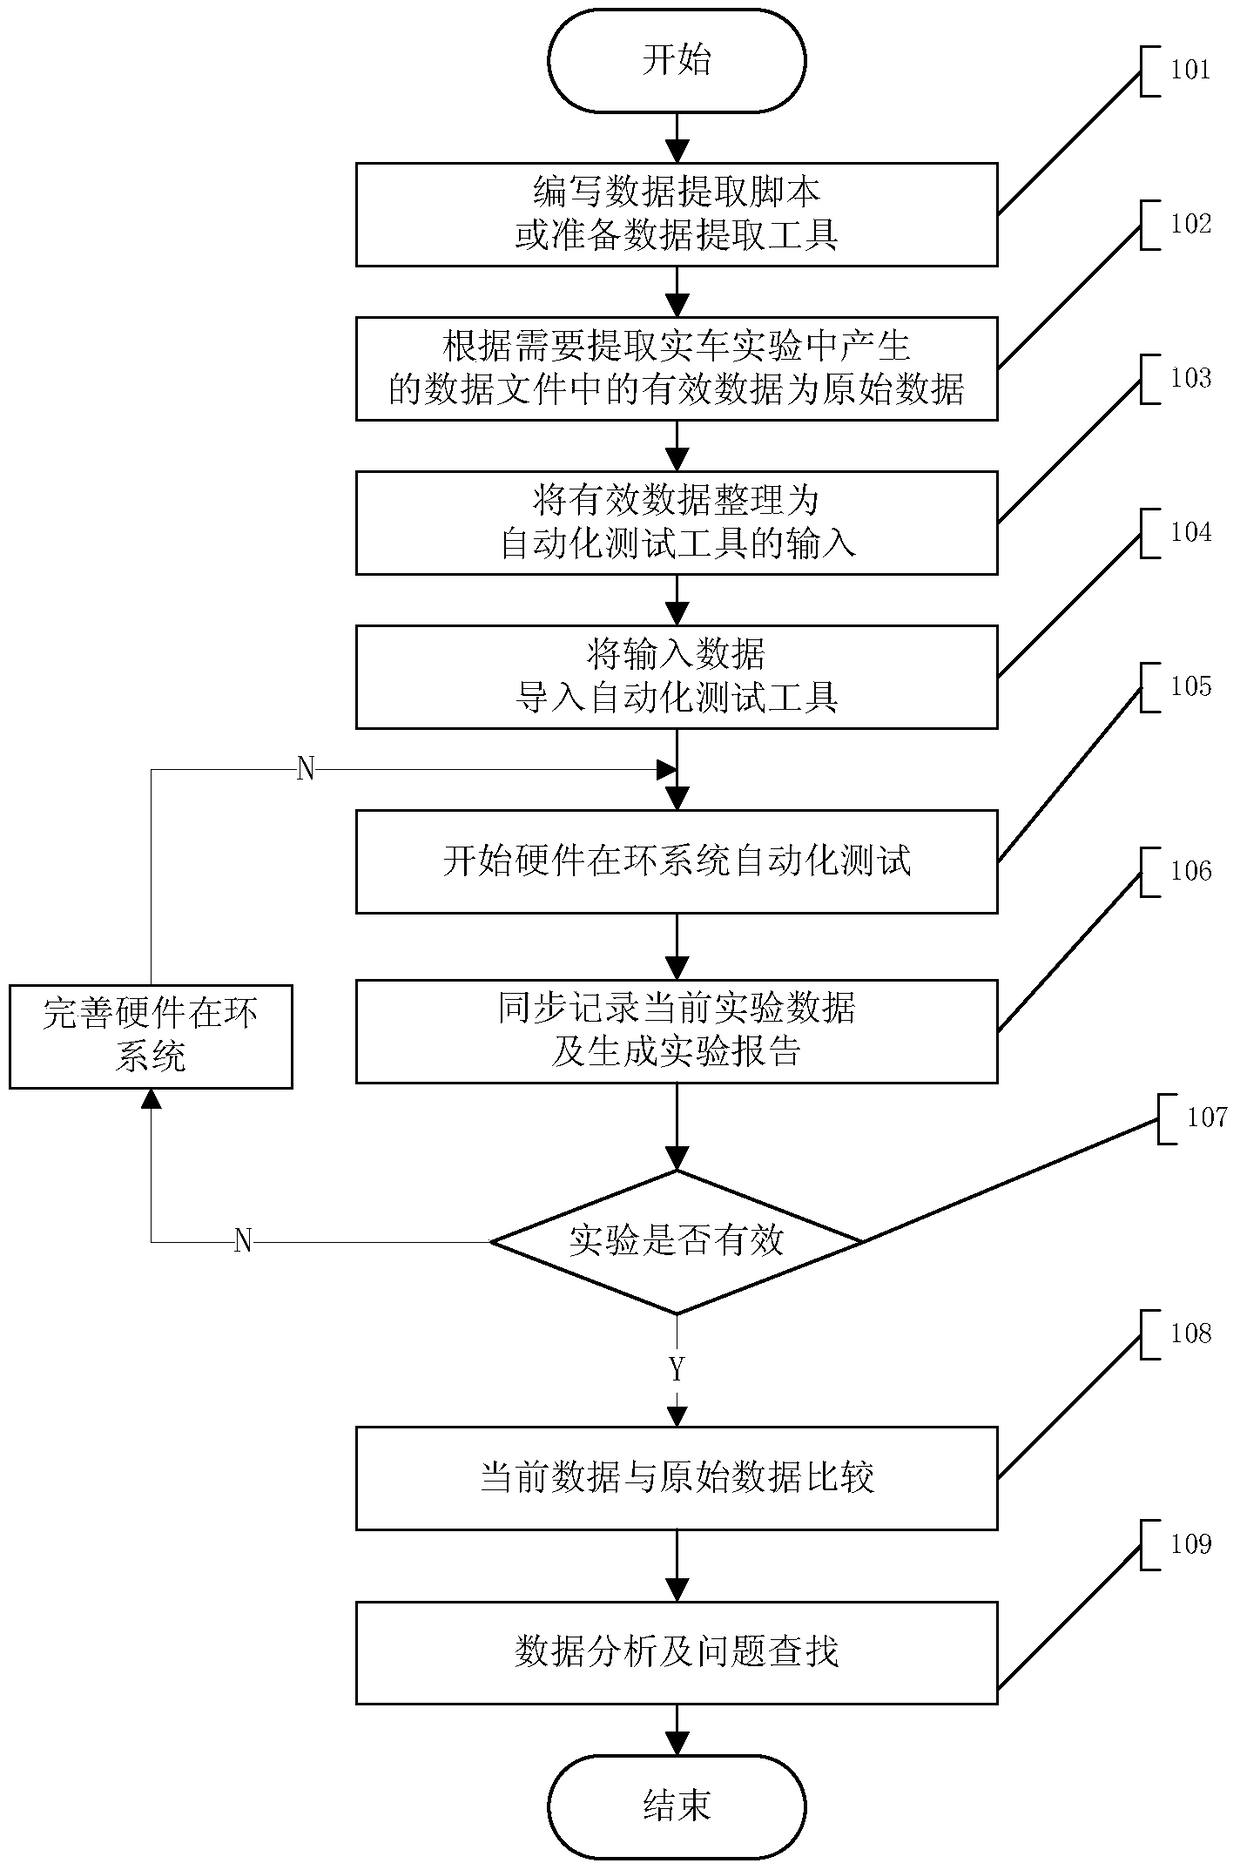 Generating method of hardware-in-the-loop test case for software function verification of engine electronic control unit